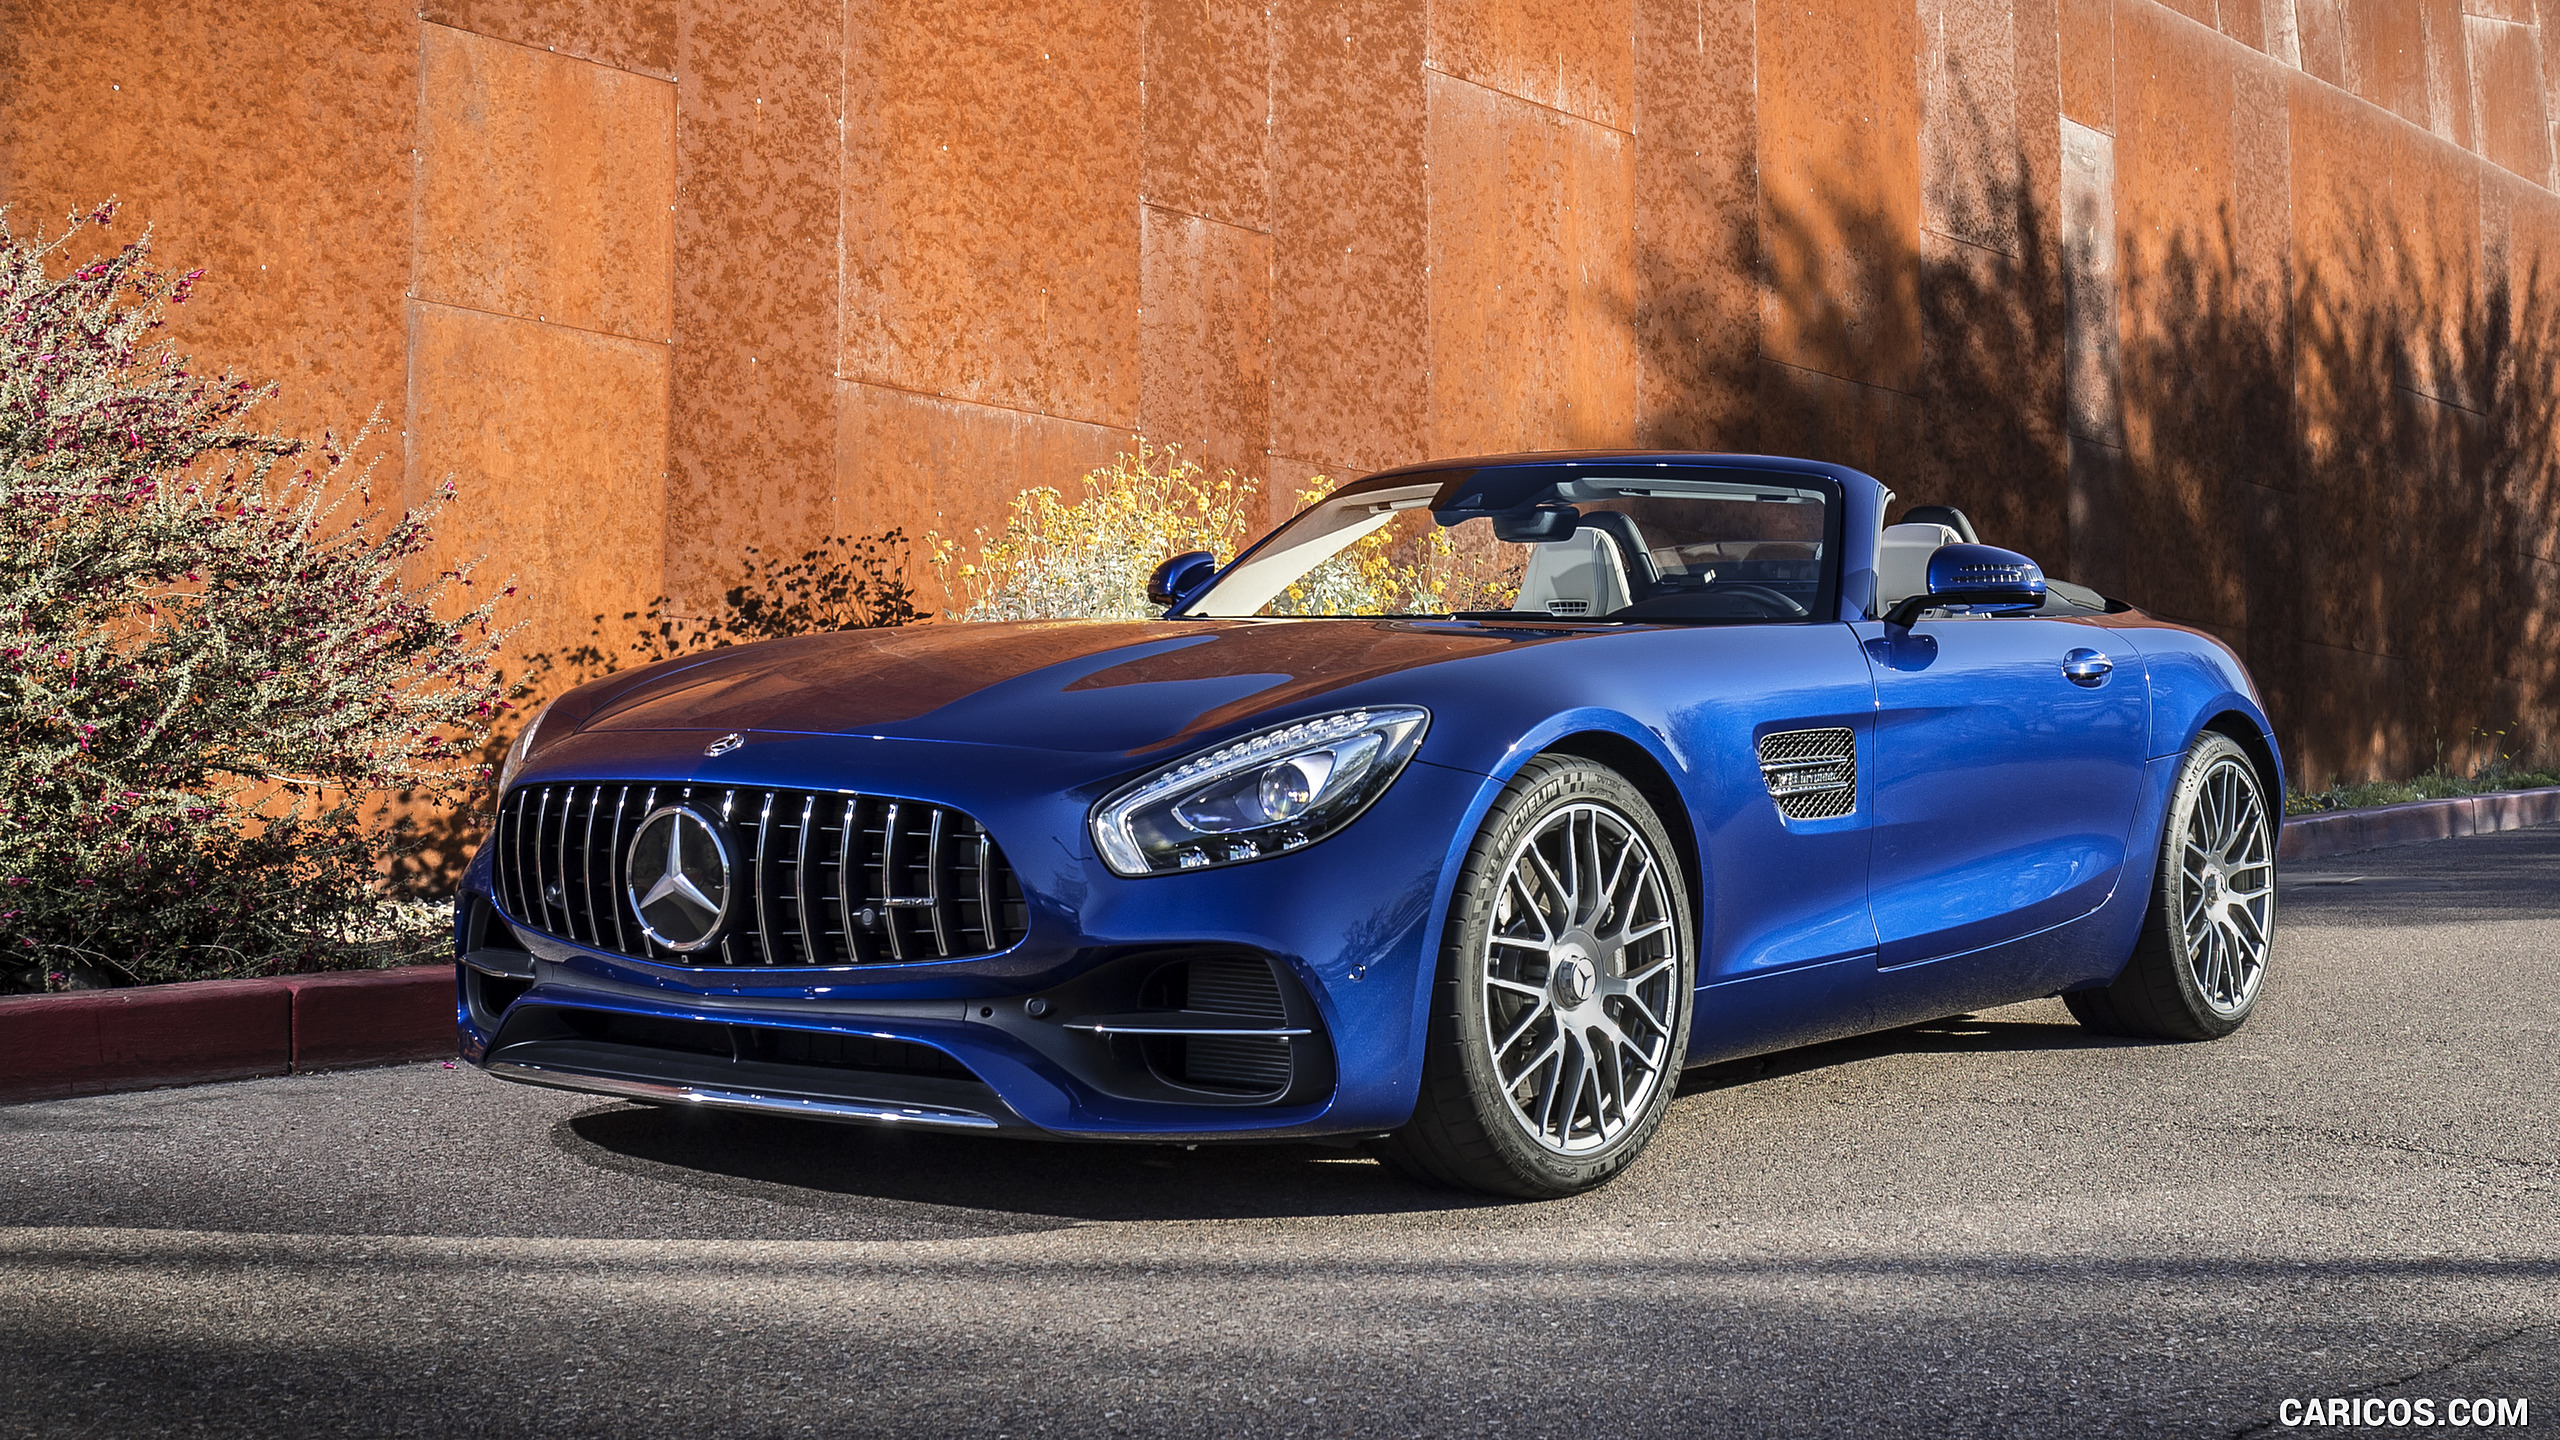 2018 Mercedes-AMG GT Roadster - Front Three-Quarter, #151 of 350